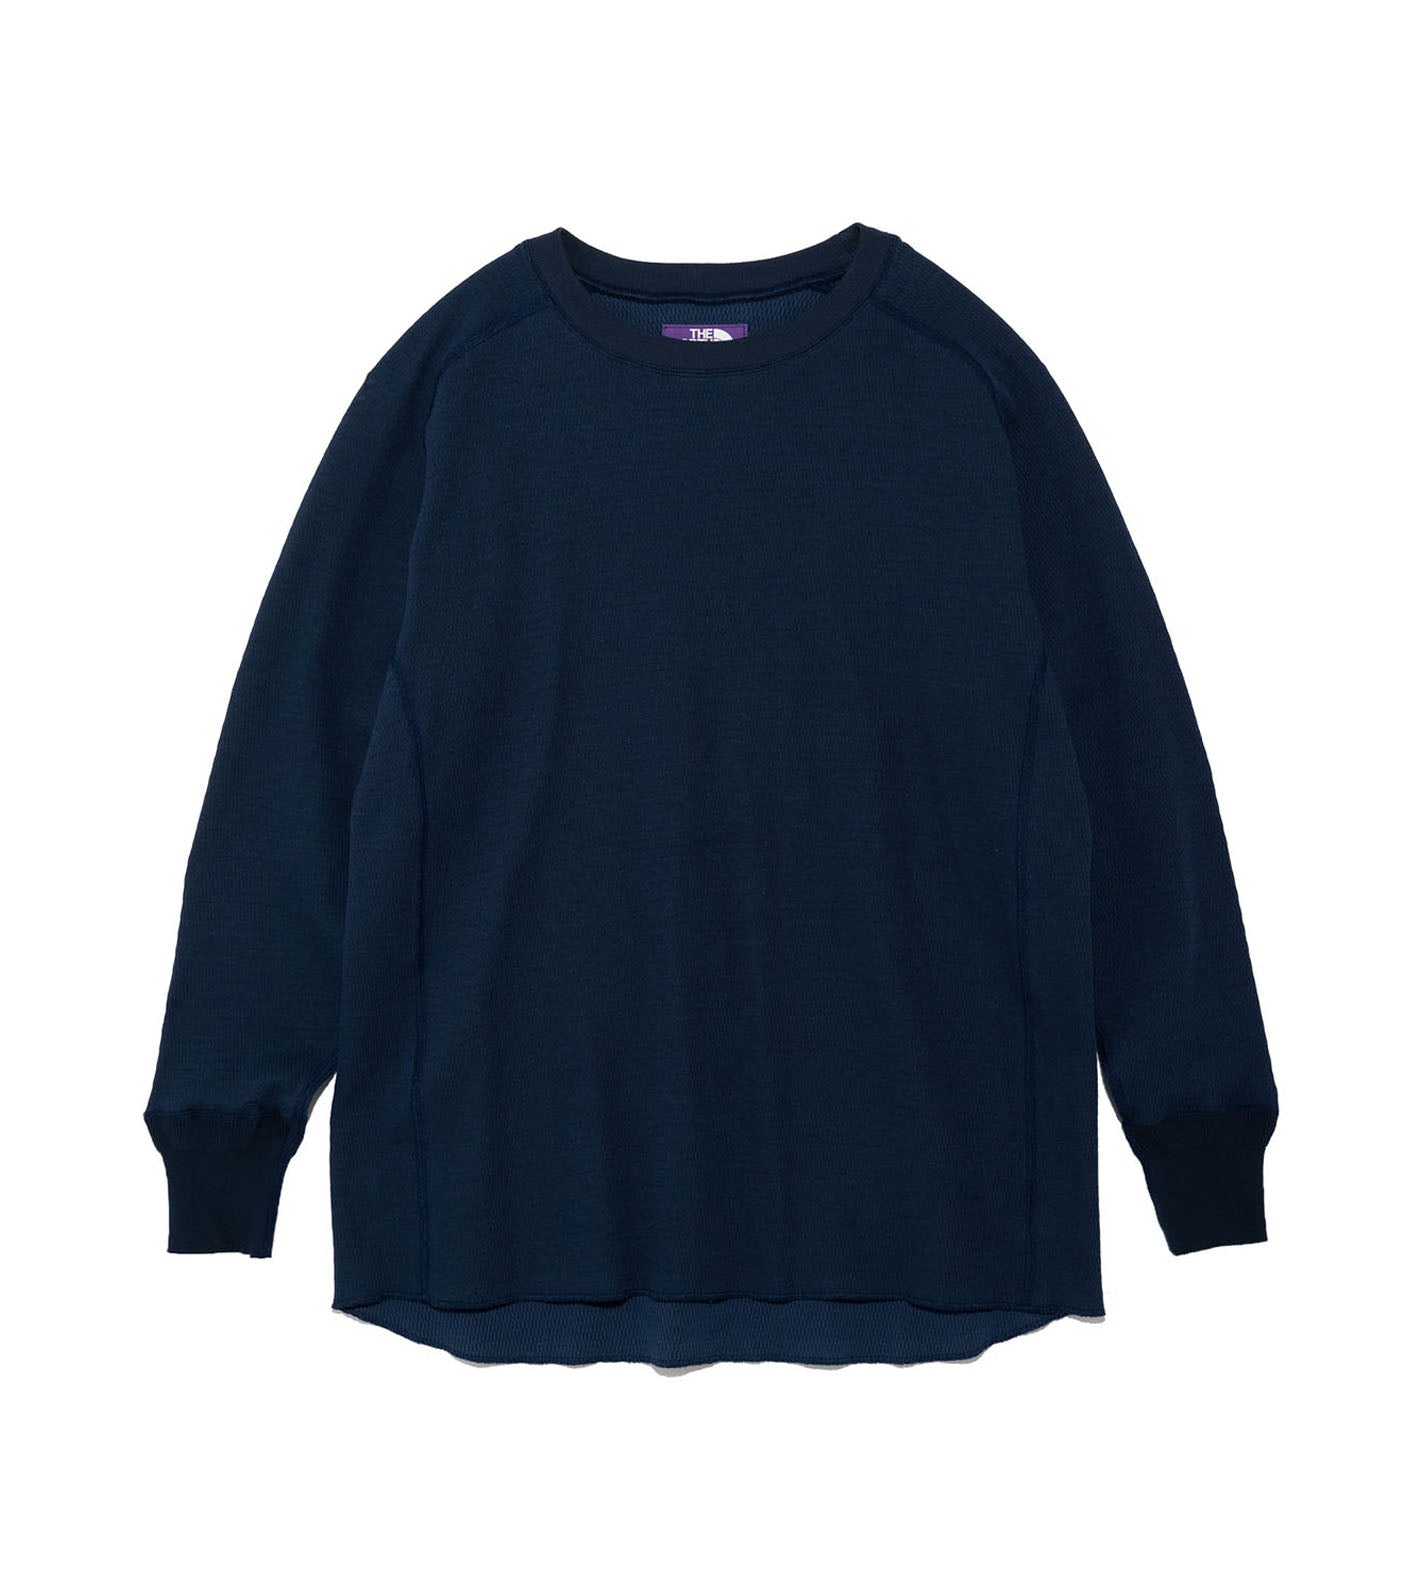 THE NORTH FACE PURPLE LABEL Thermal Field Long Sleeve Tee